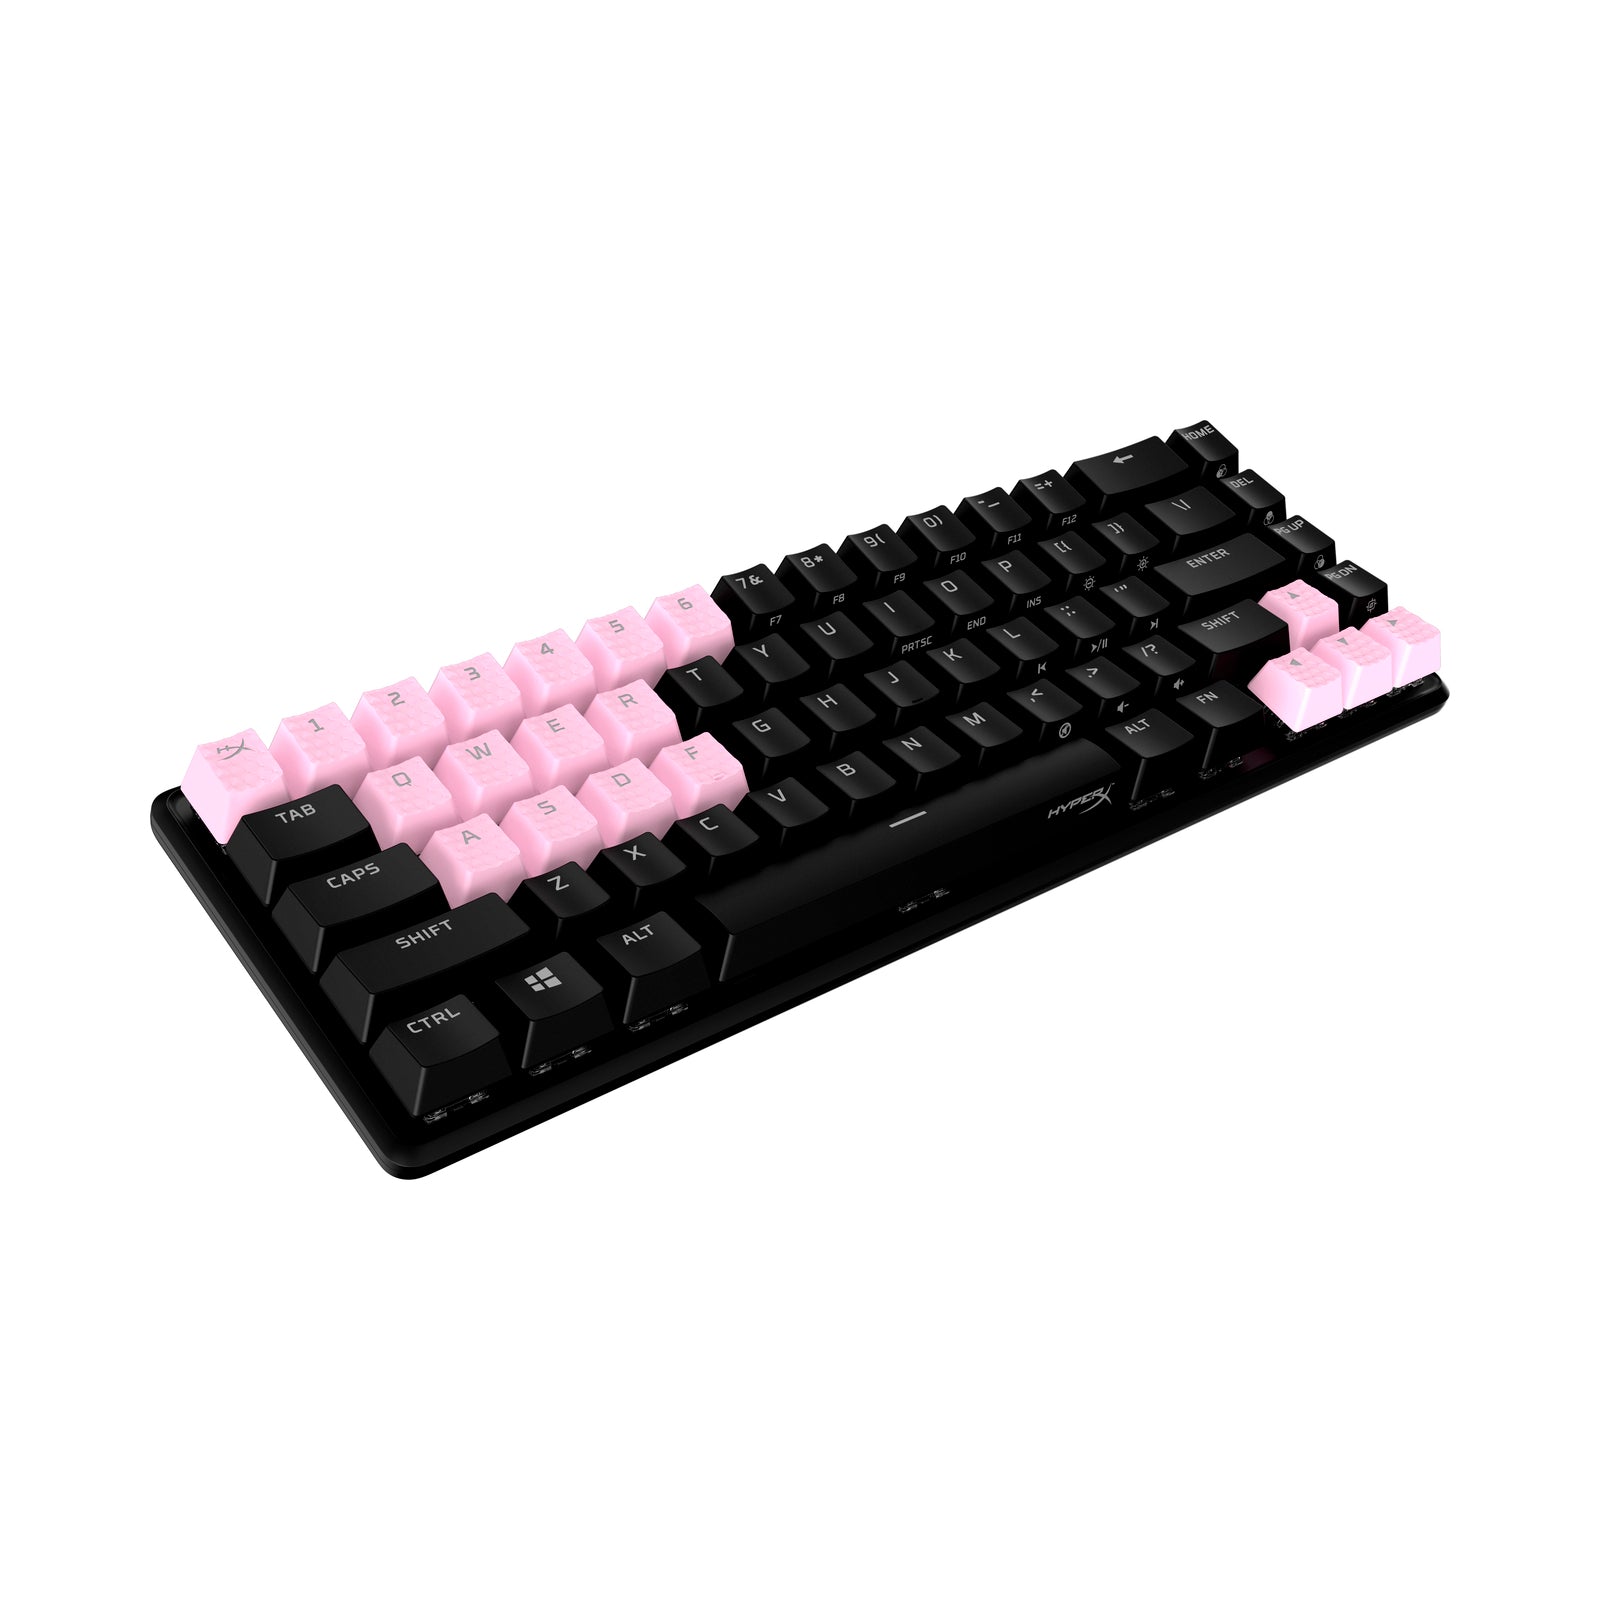 Front angled view of HyperX rubber keycaps in pink on an unlit keyboard